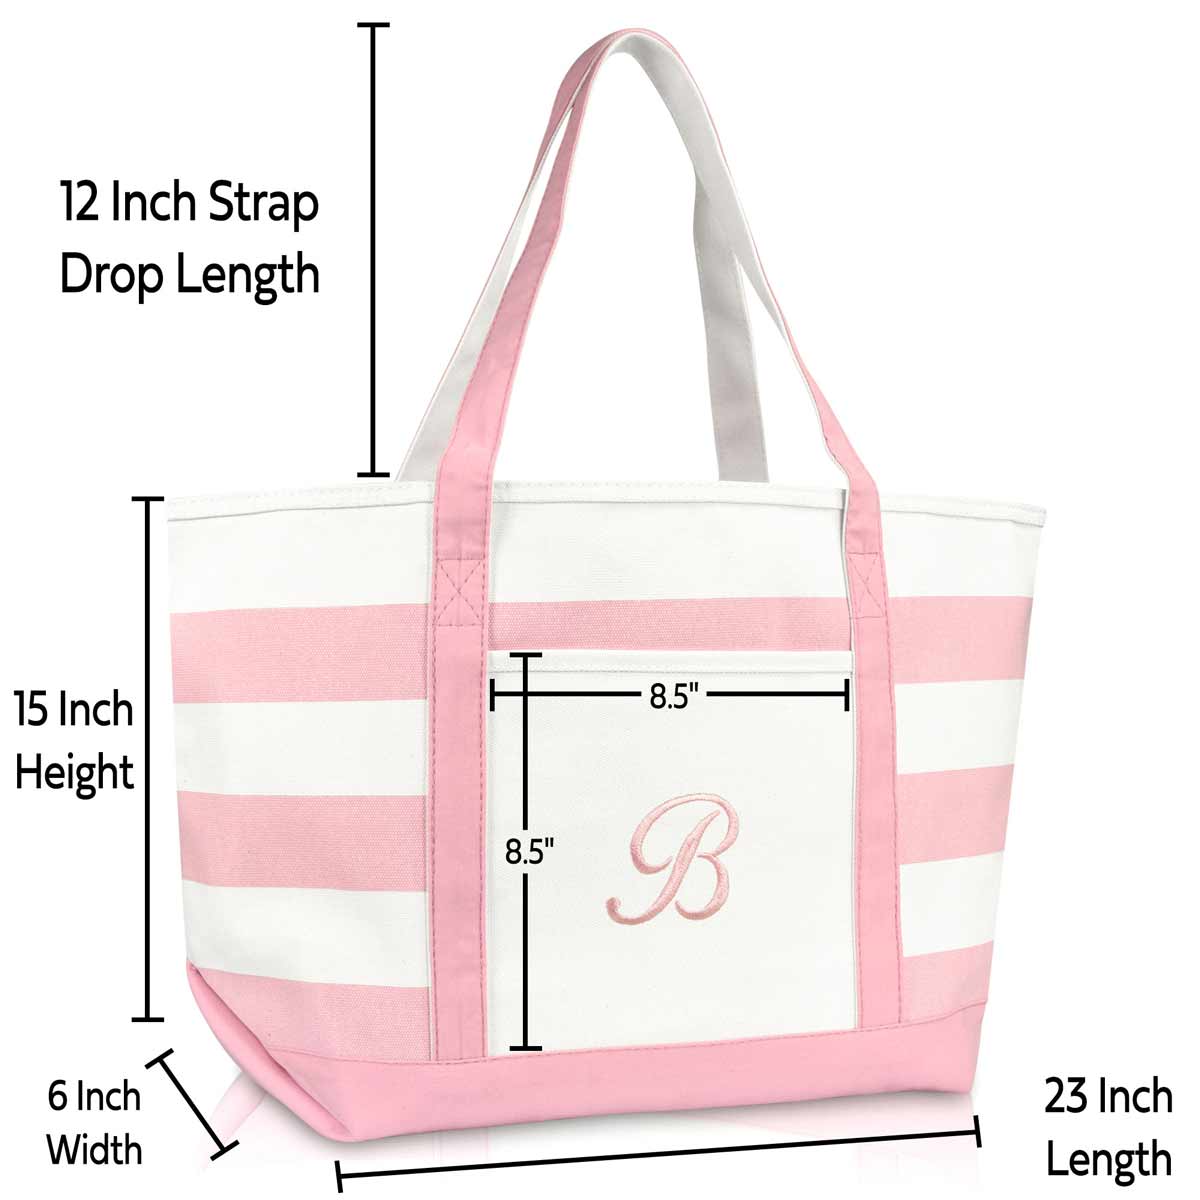 Dalix Striped Beach Bag Tote Bags Satchel Personalized Pink Ballent Letter A - Z